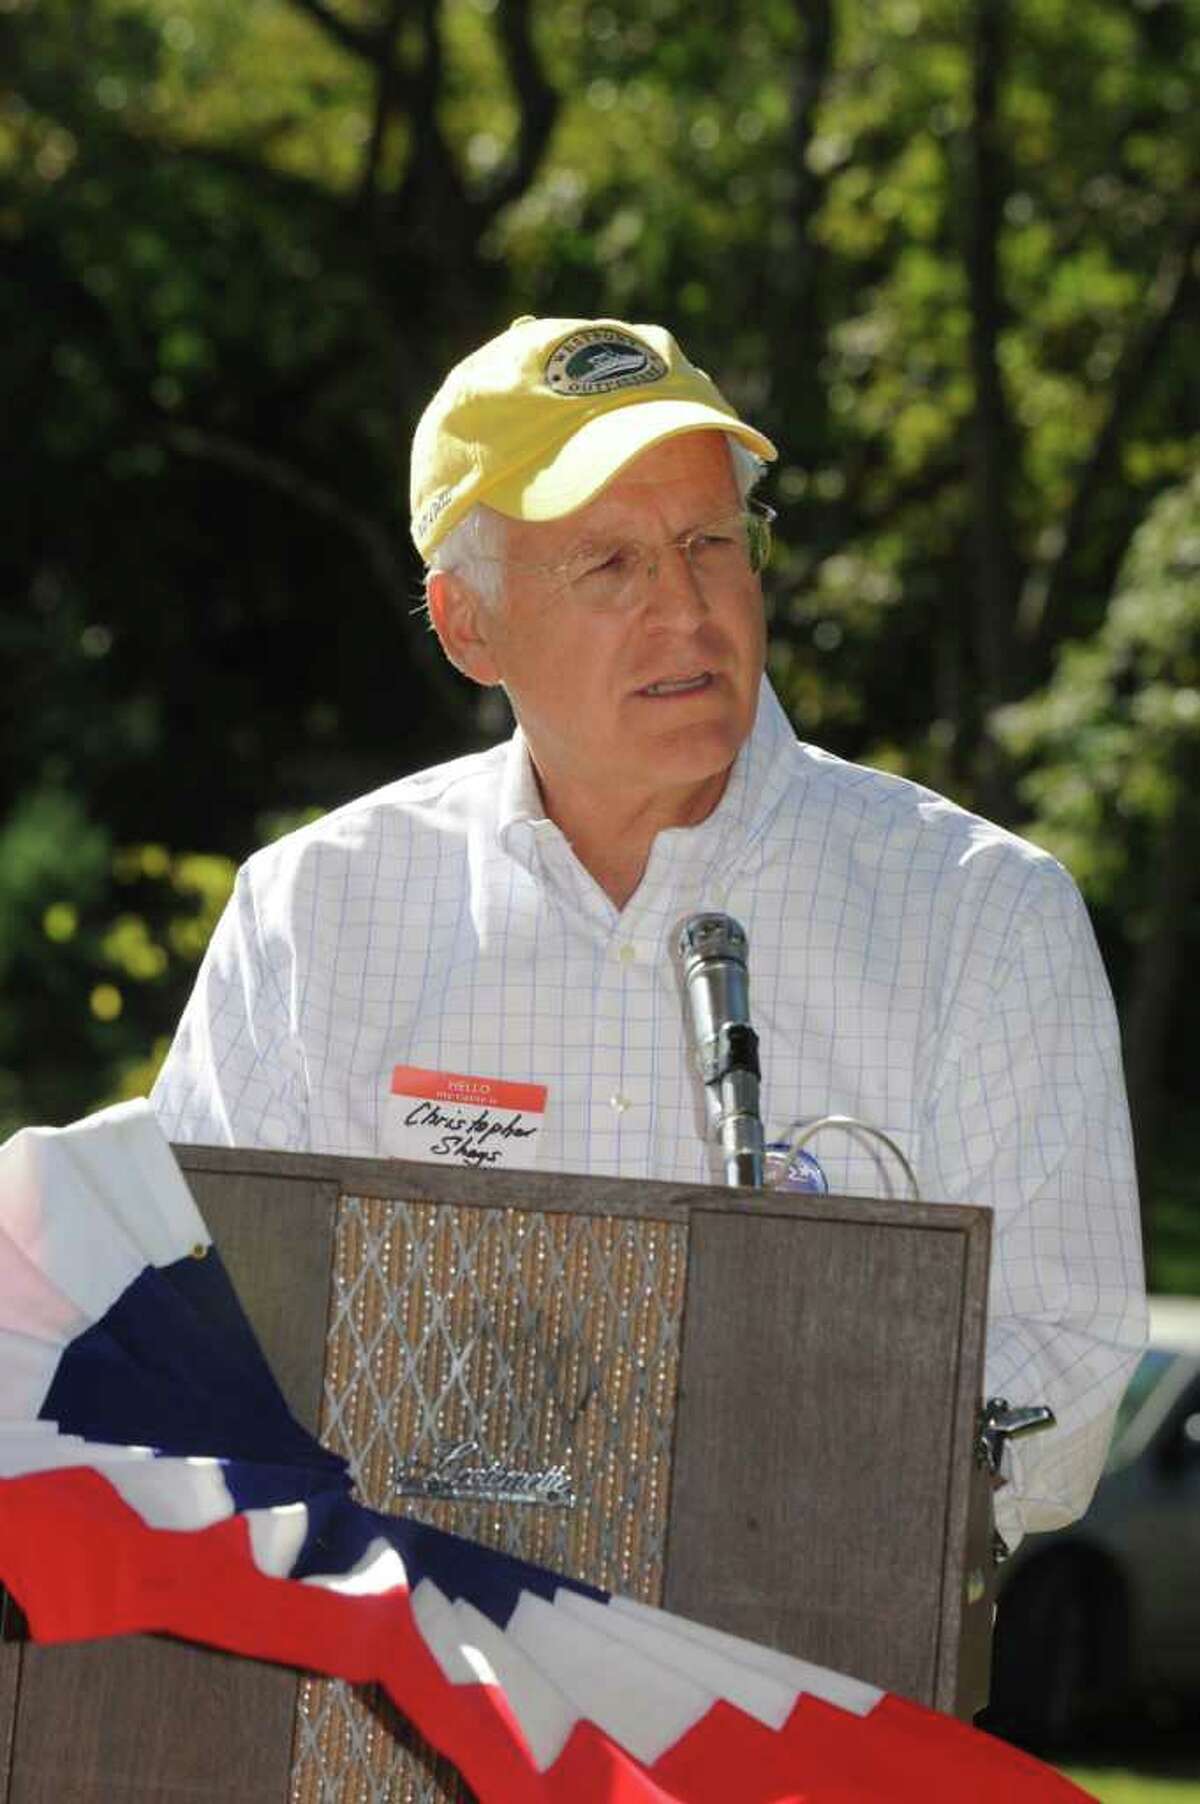 Former U.S. Rep. Christopher Shays, who is considering a run for the U.S. Senate, speaking at the Cos Cob Republican Club and Republican Town Committee's 80th annual clambake Sunday, Sept. 18, 2011.